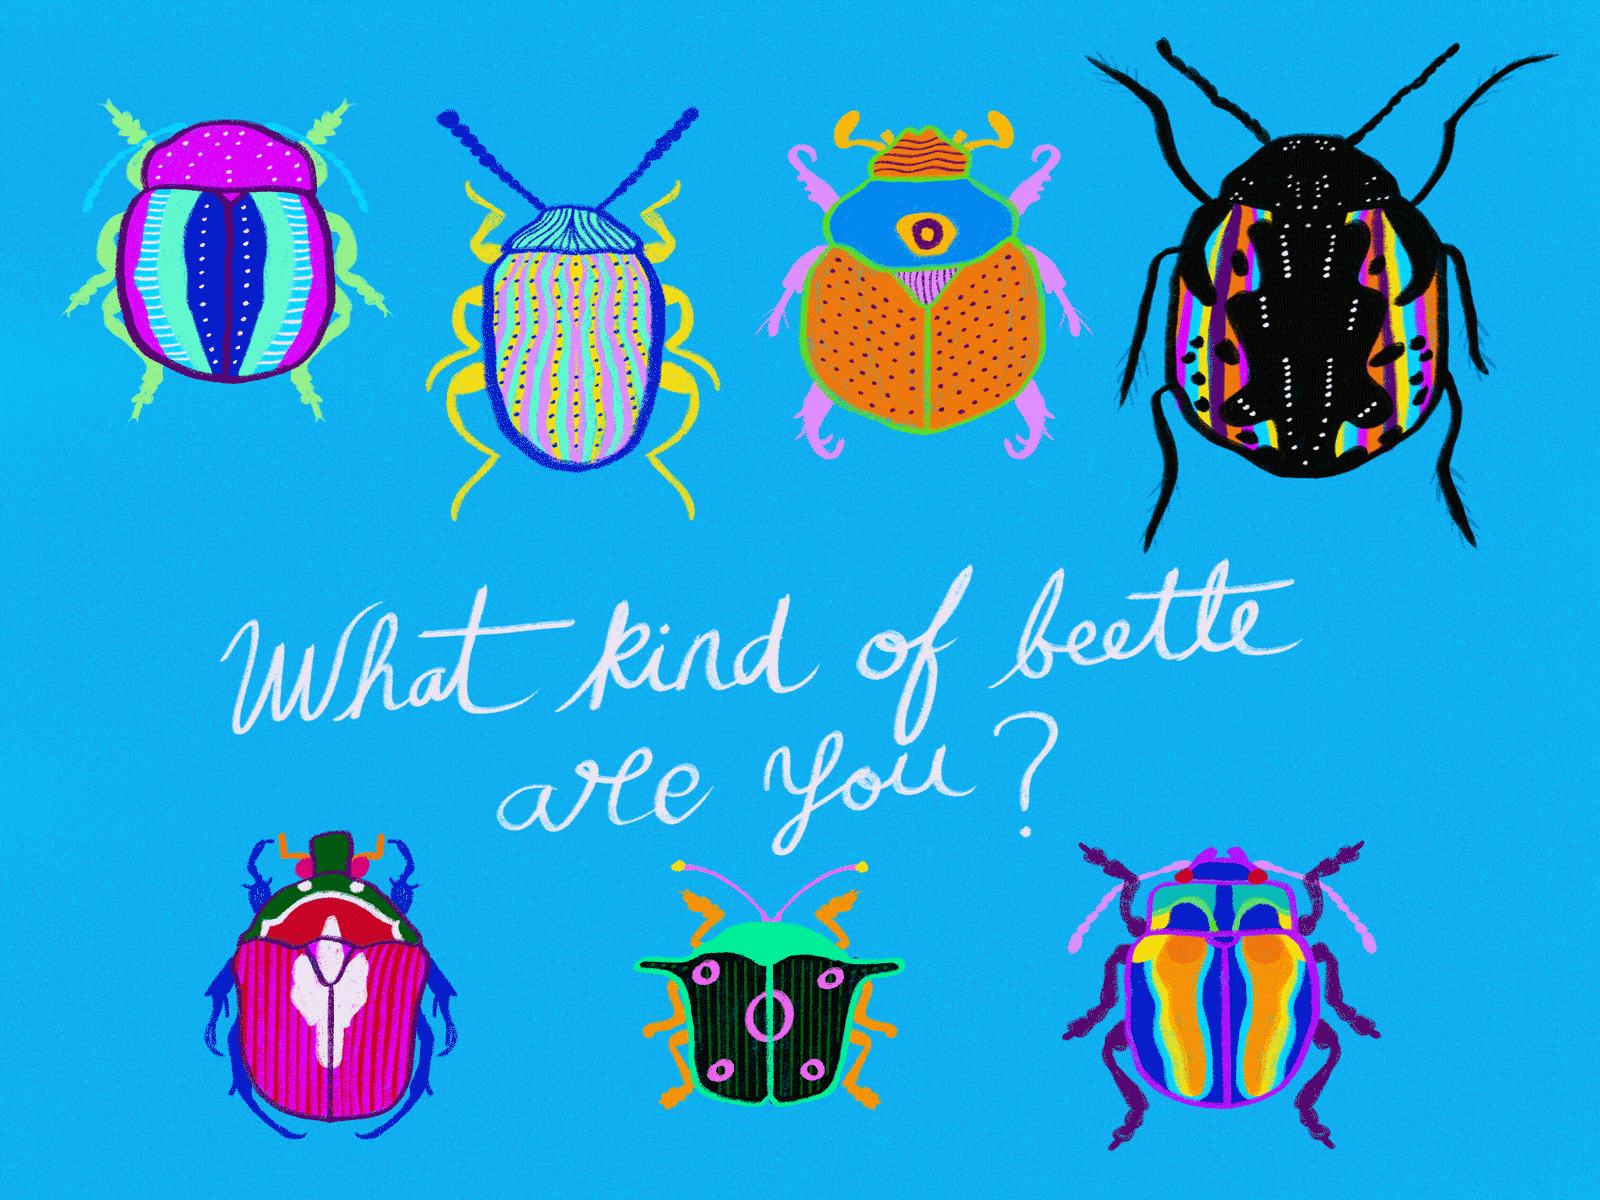 –What kind of beetle are you?